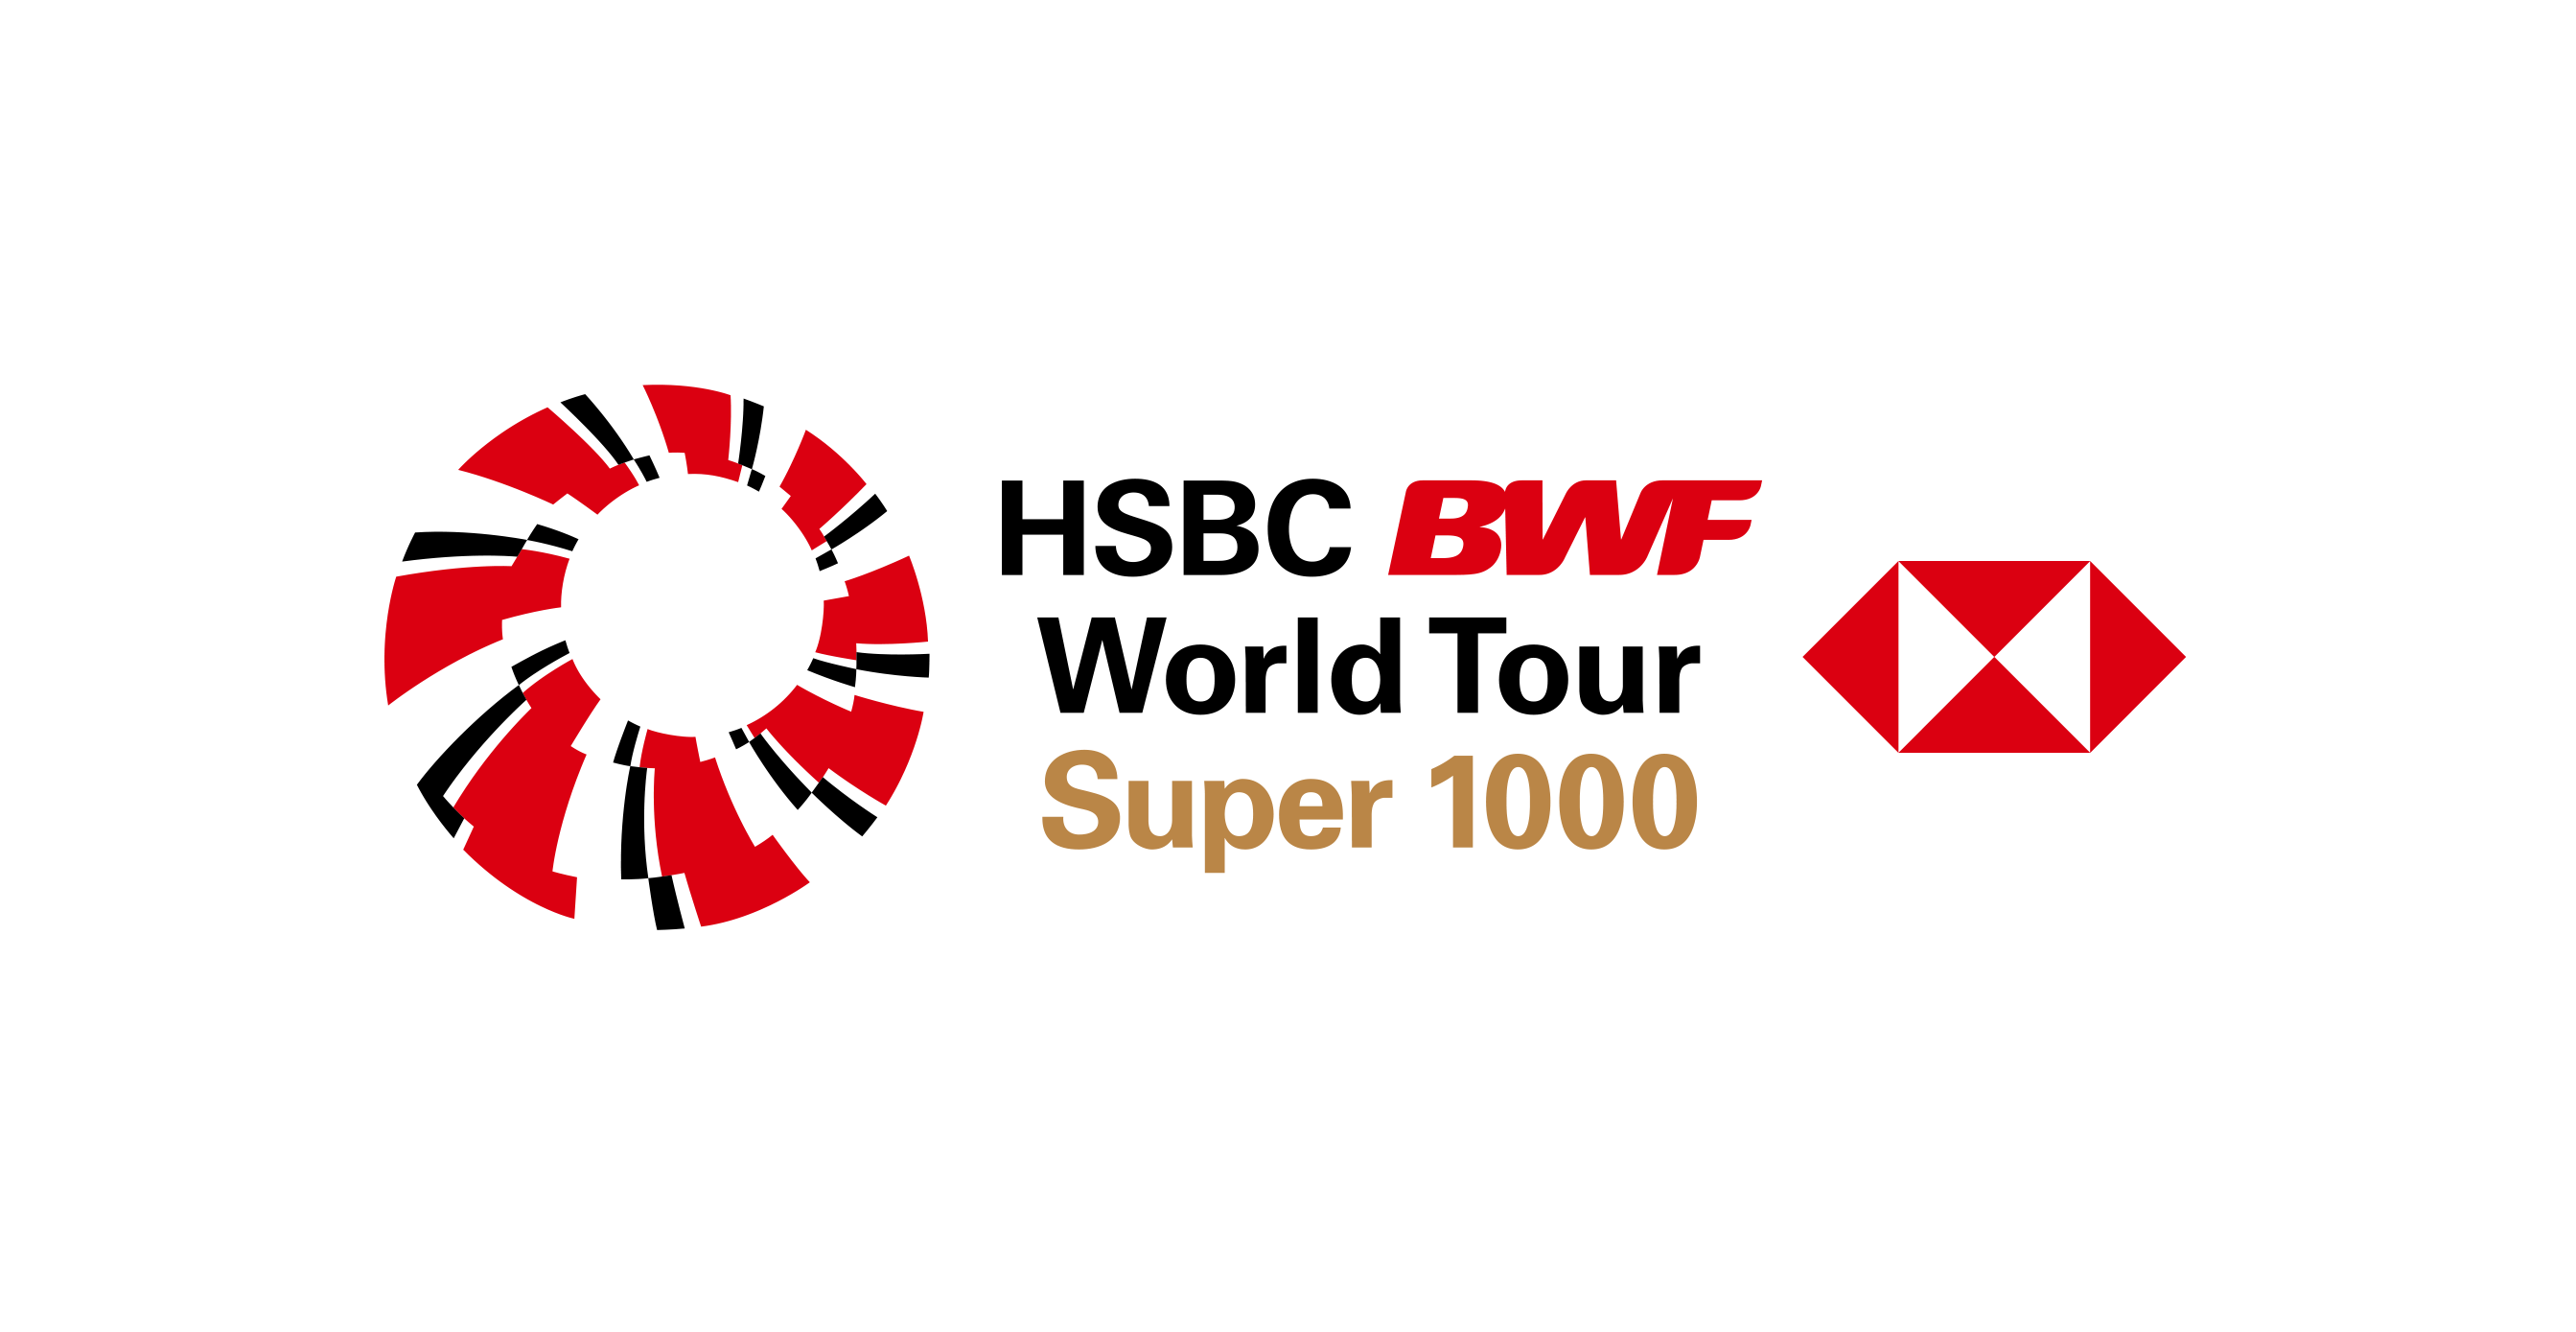 BWF and HSBC Extend Partnership with Multi-Year Deal Badminton England